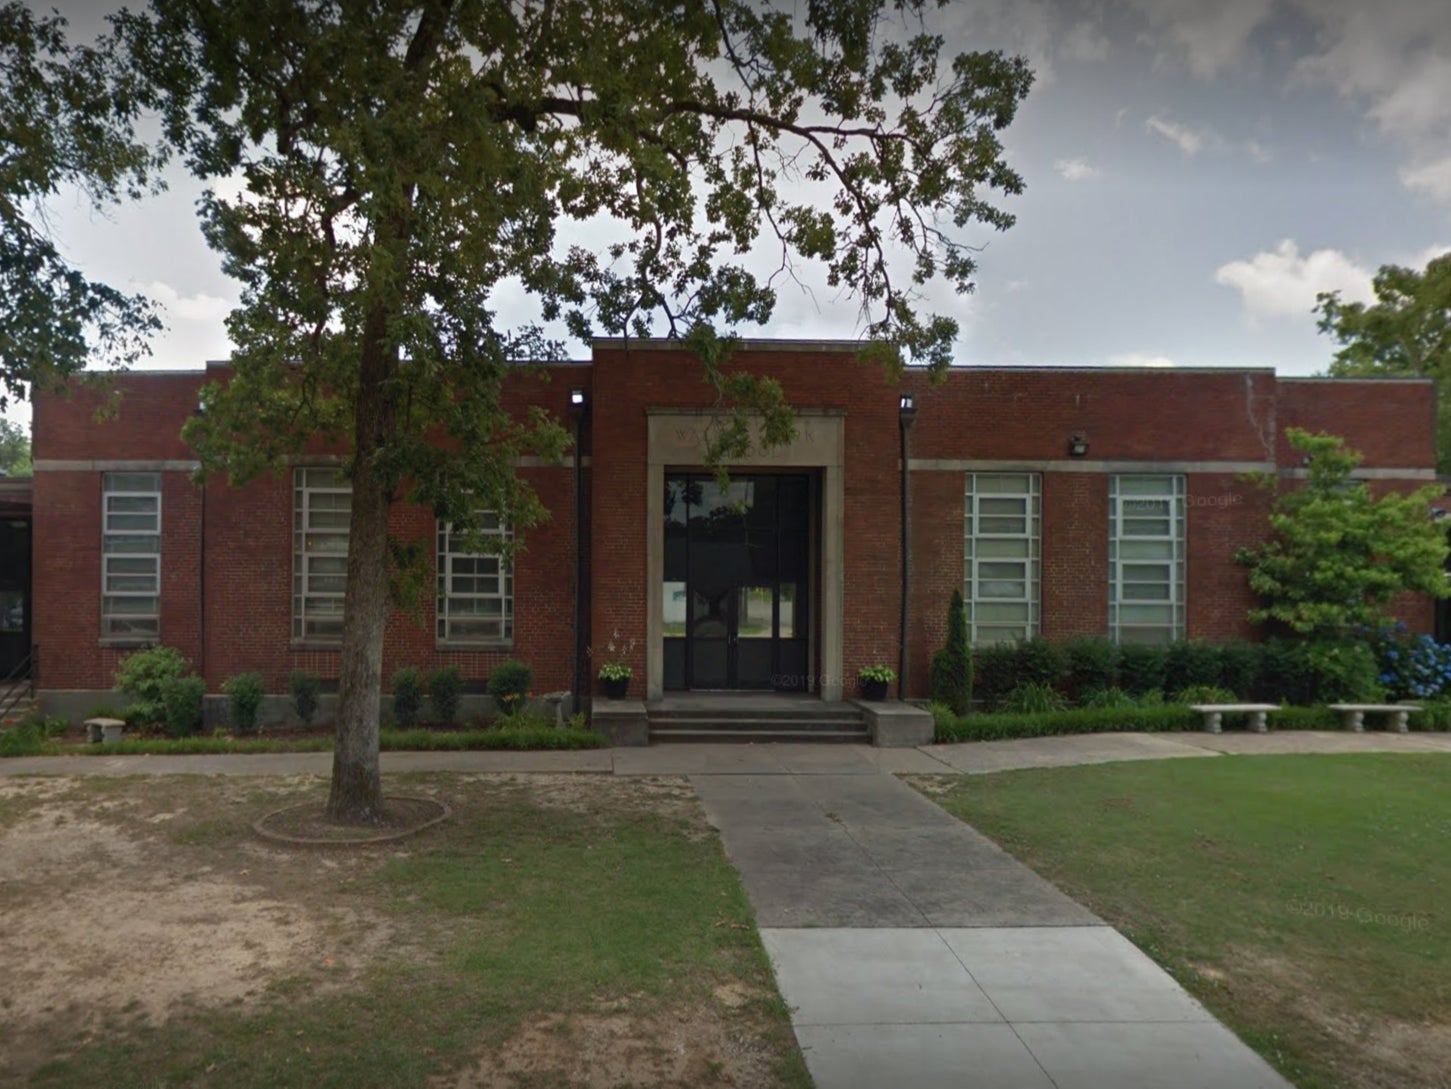 Walnut Park Elementary School in Gadsen, Alabama, where a ‘potential intruder’ was shot and killed by police on 9 June, 2022.